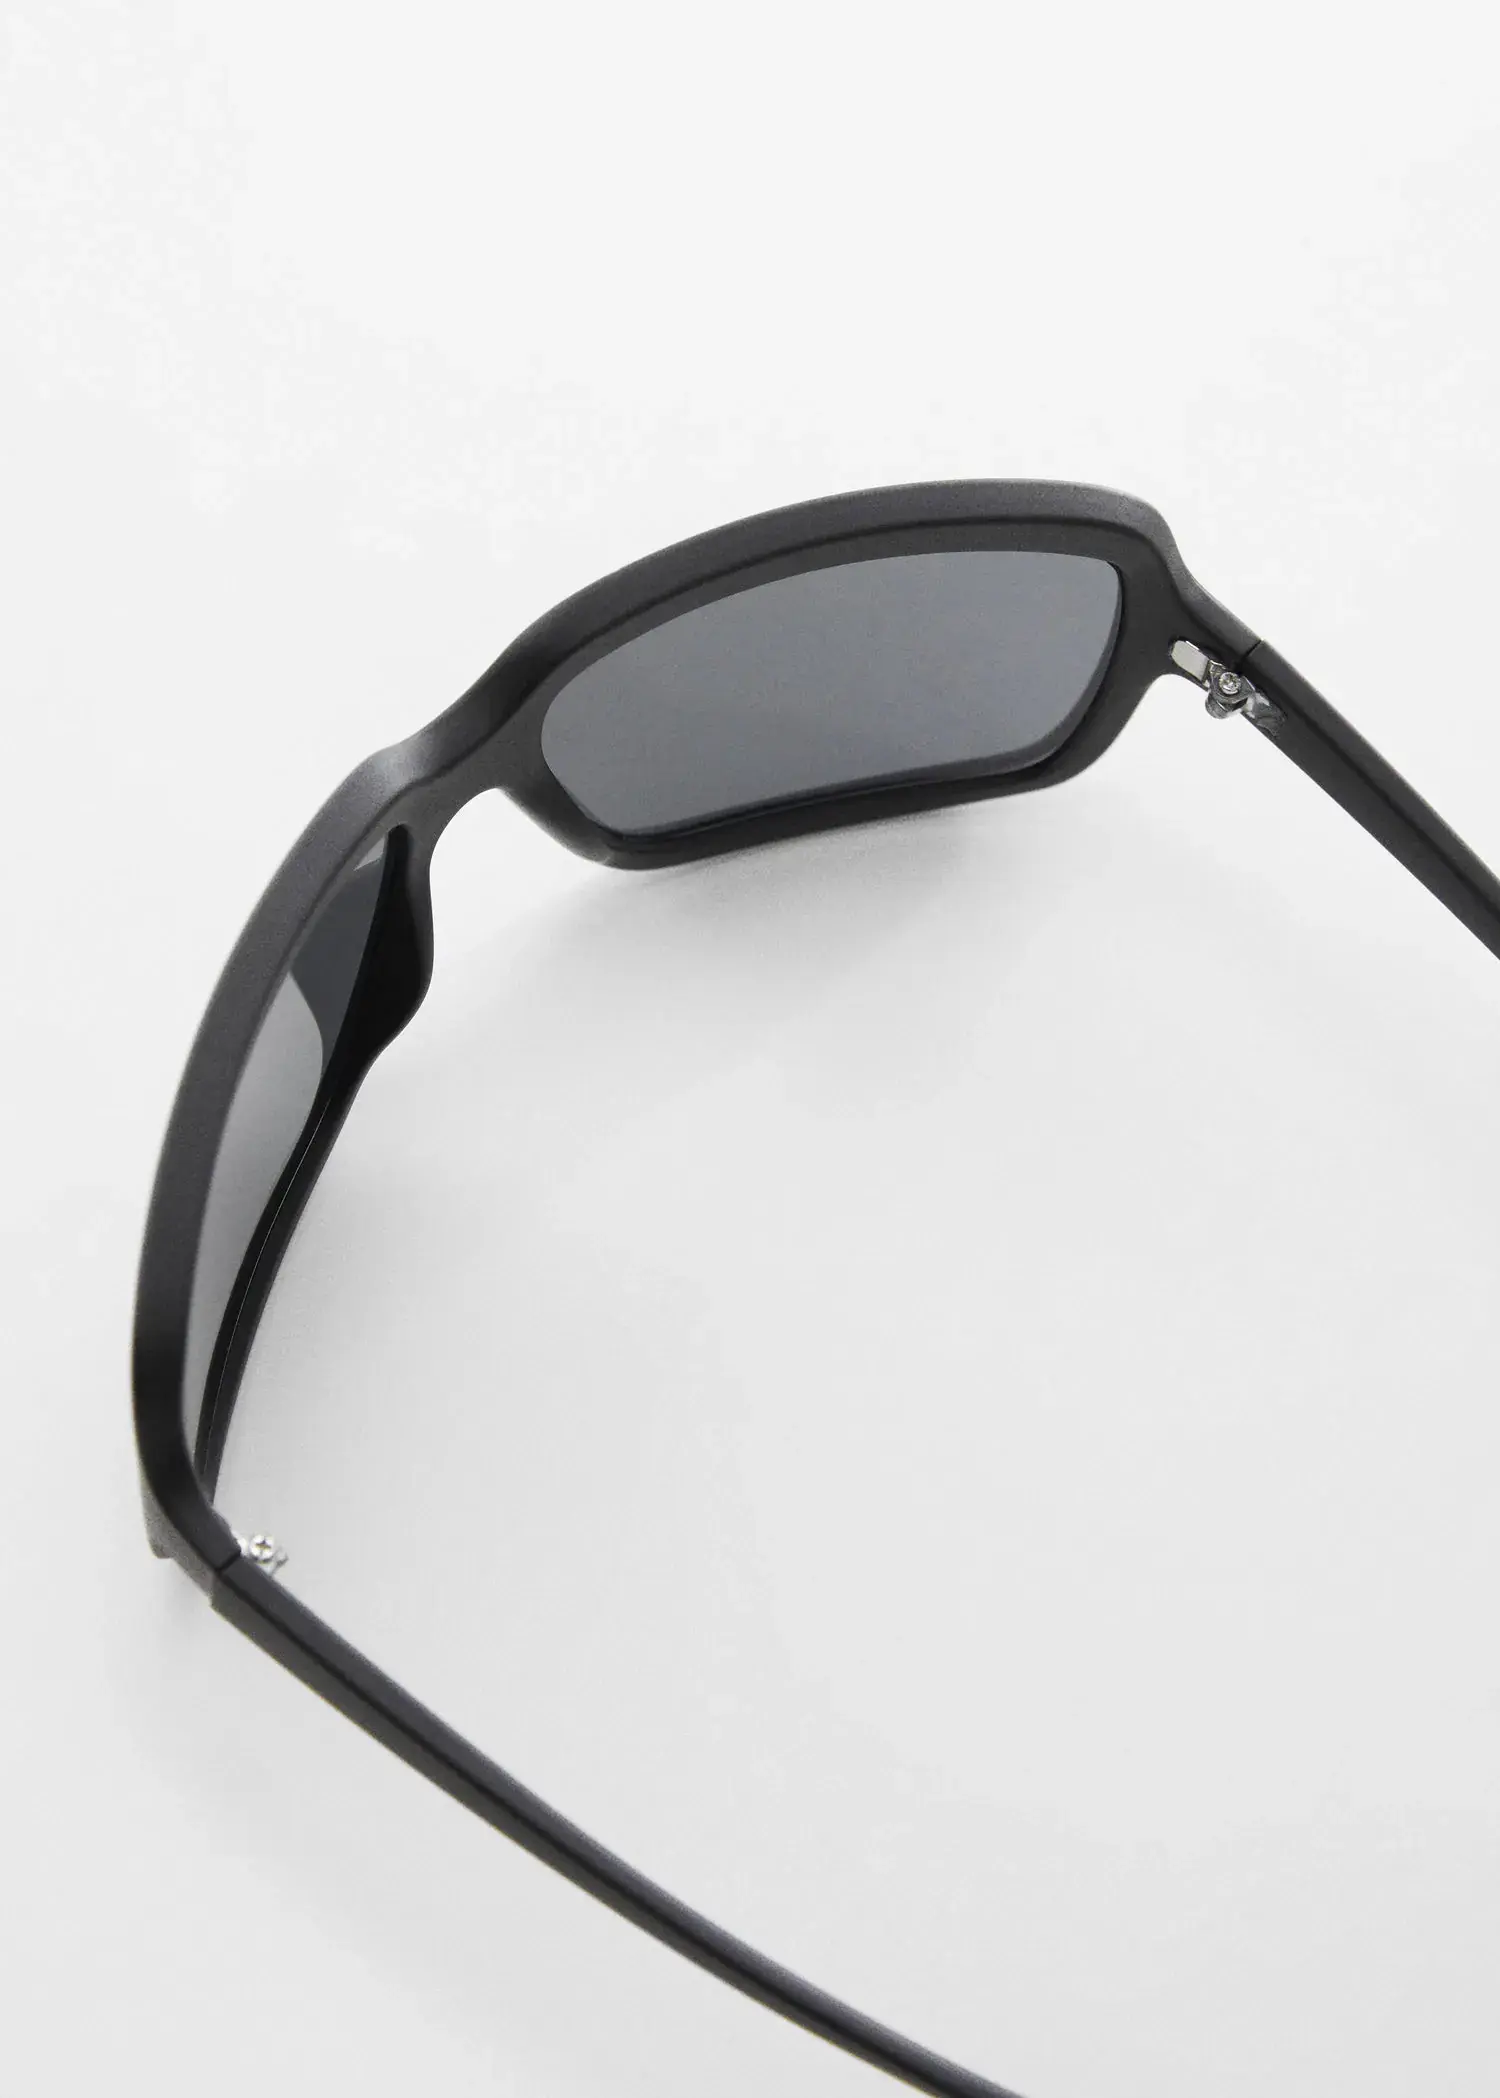 Mango Squared frame sunglasses. a pair of sunglasses on top of a white surface. 